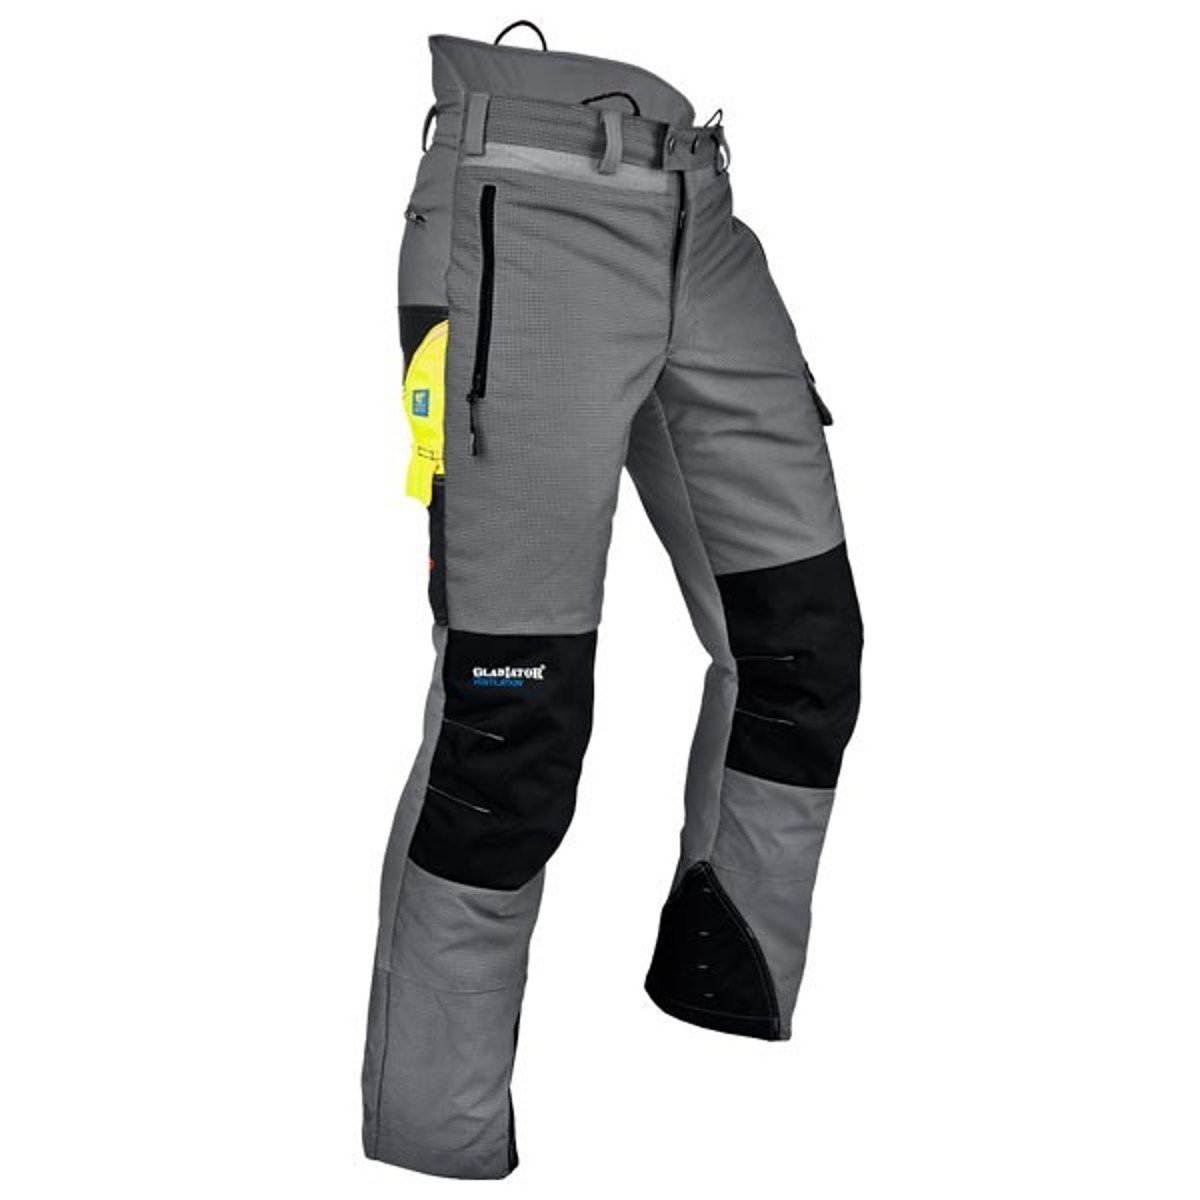 Pfanner Ventilation cut protection trousers type C